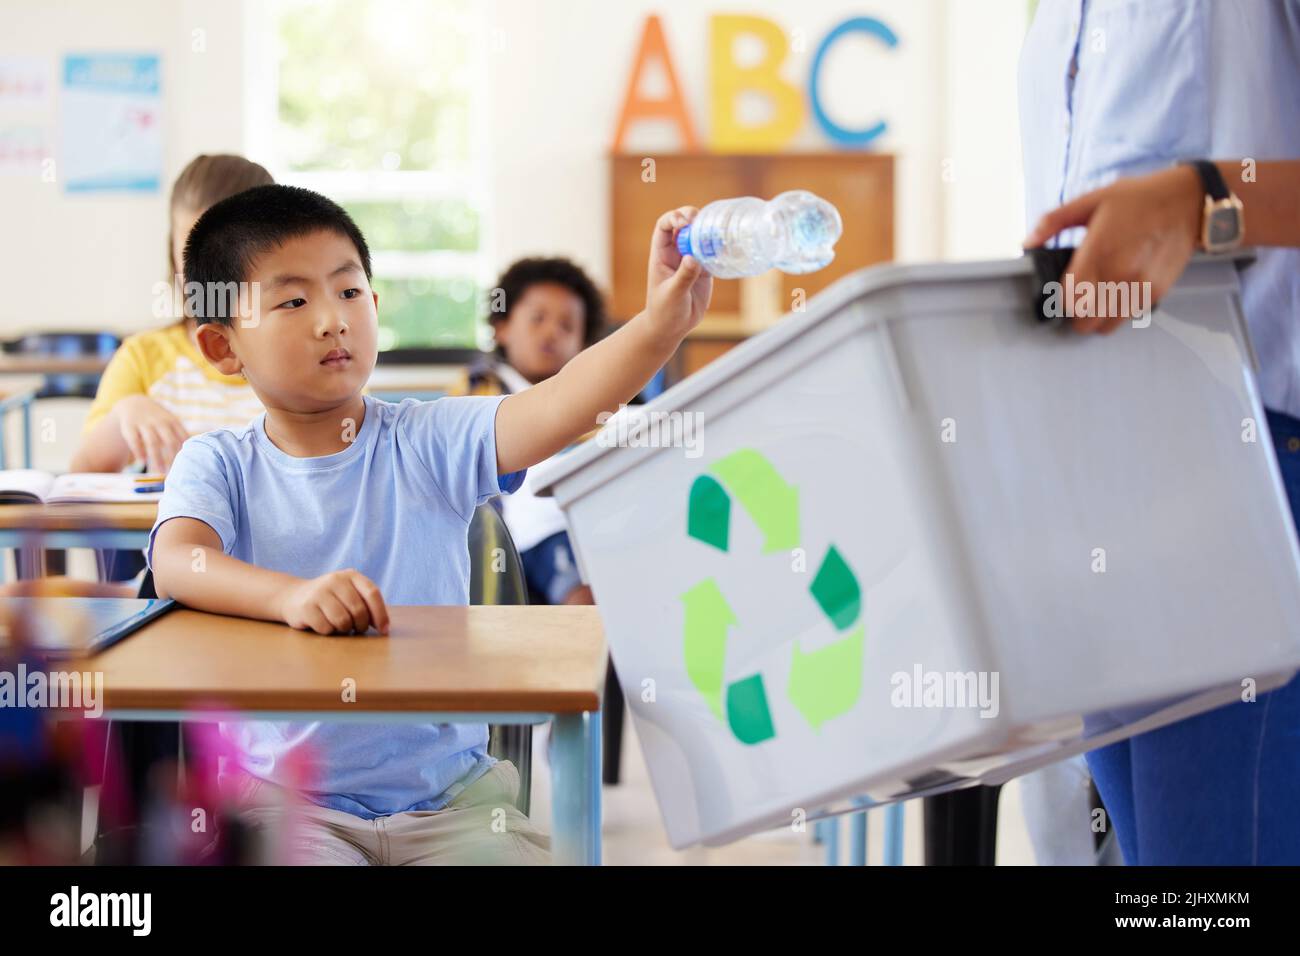 Always eager to answer. a leaner and teaching recycling in a classroom. Stock Photo